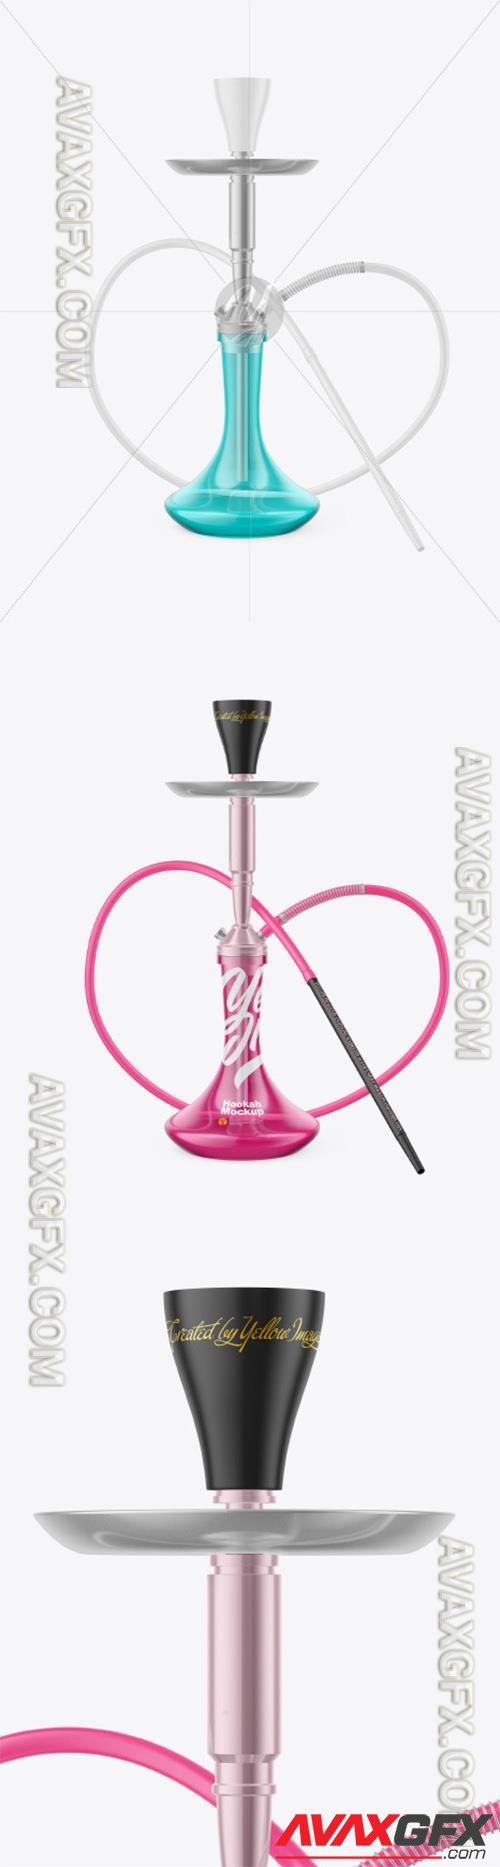 Hookah with Colored Glass Flask Mockup 89297 TIF